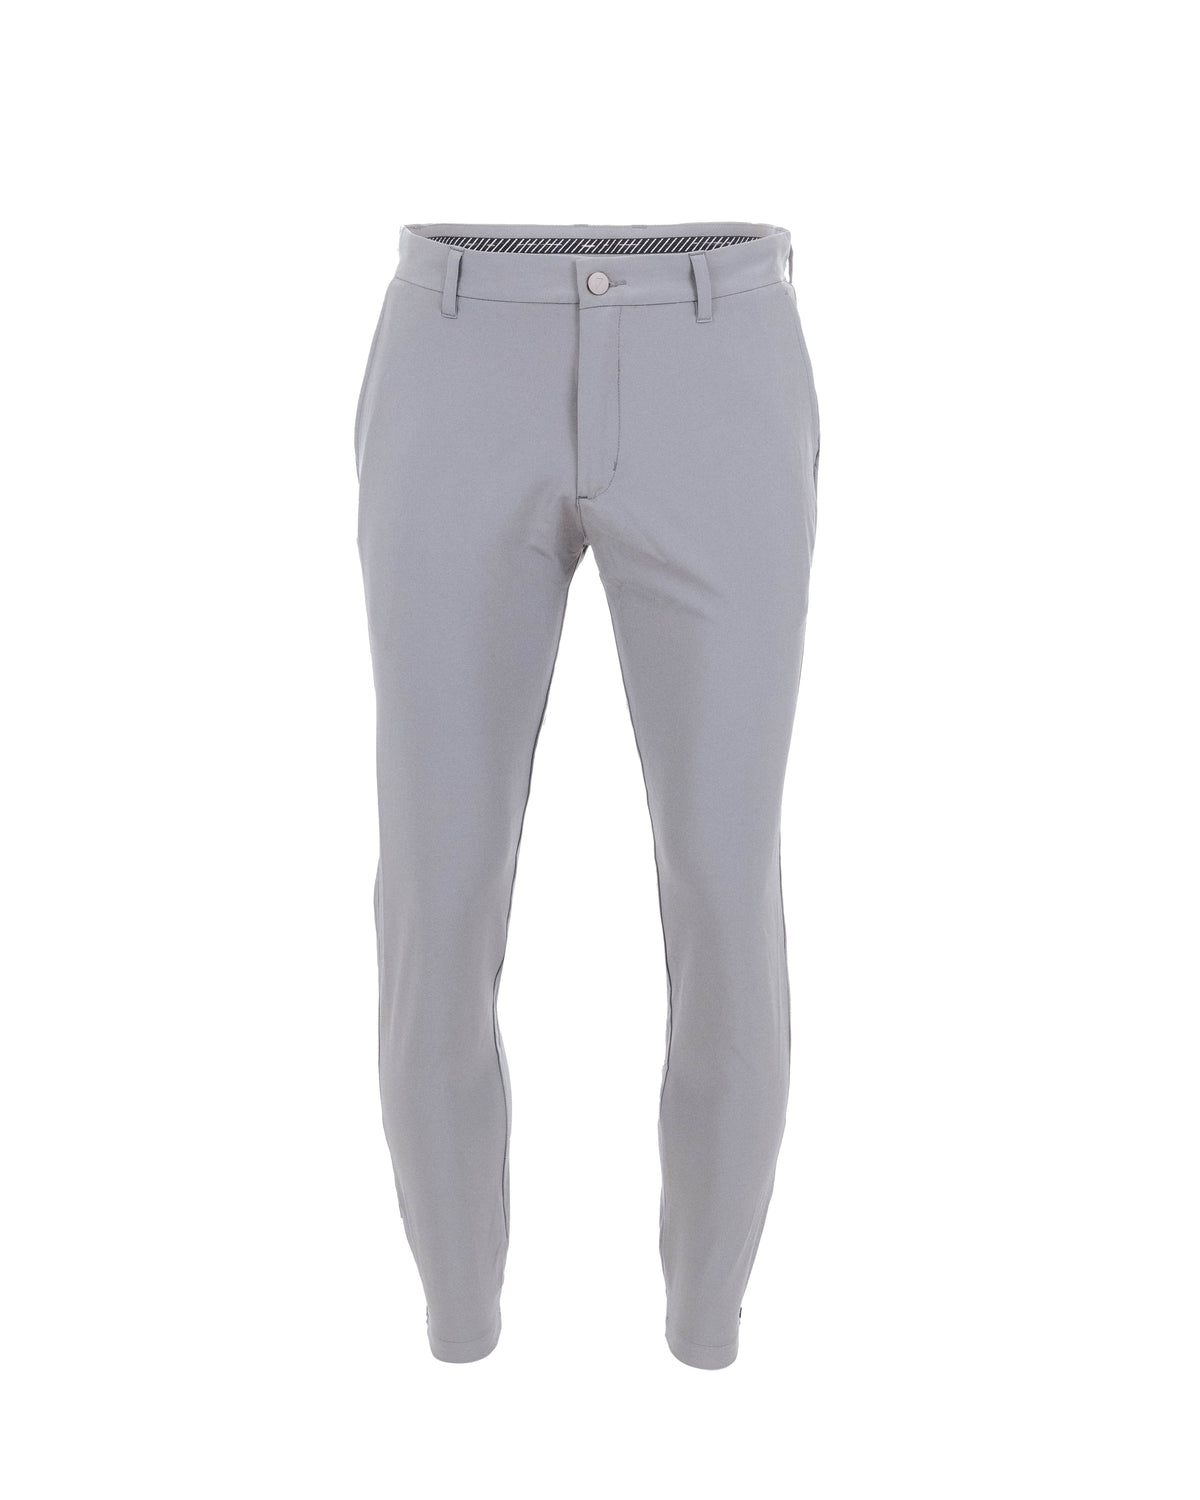 Primo Golf Joggers Review